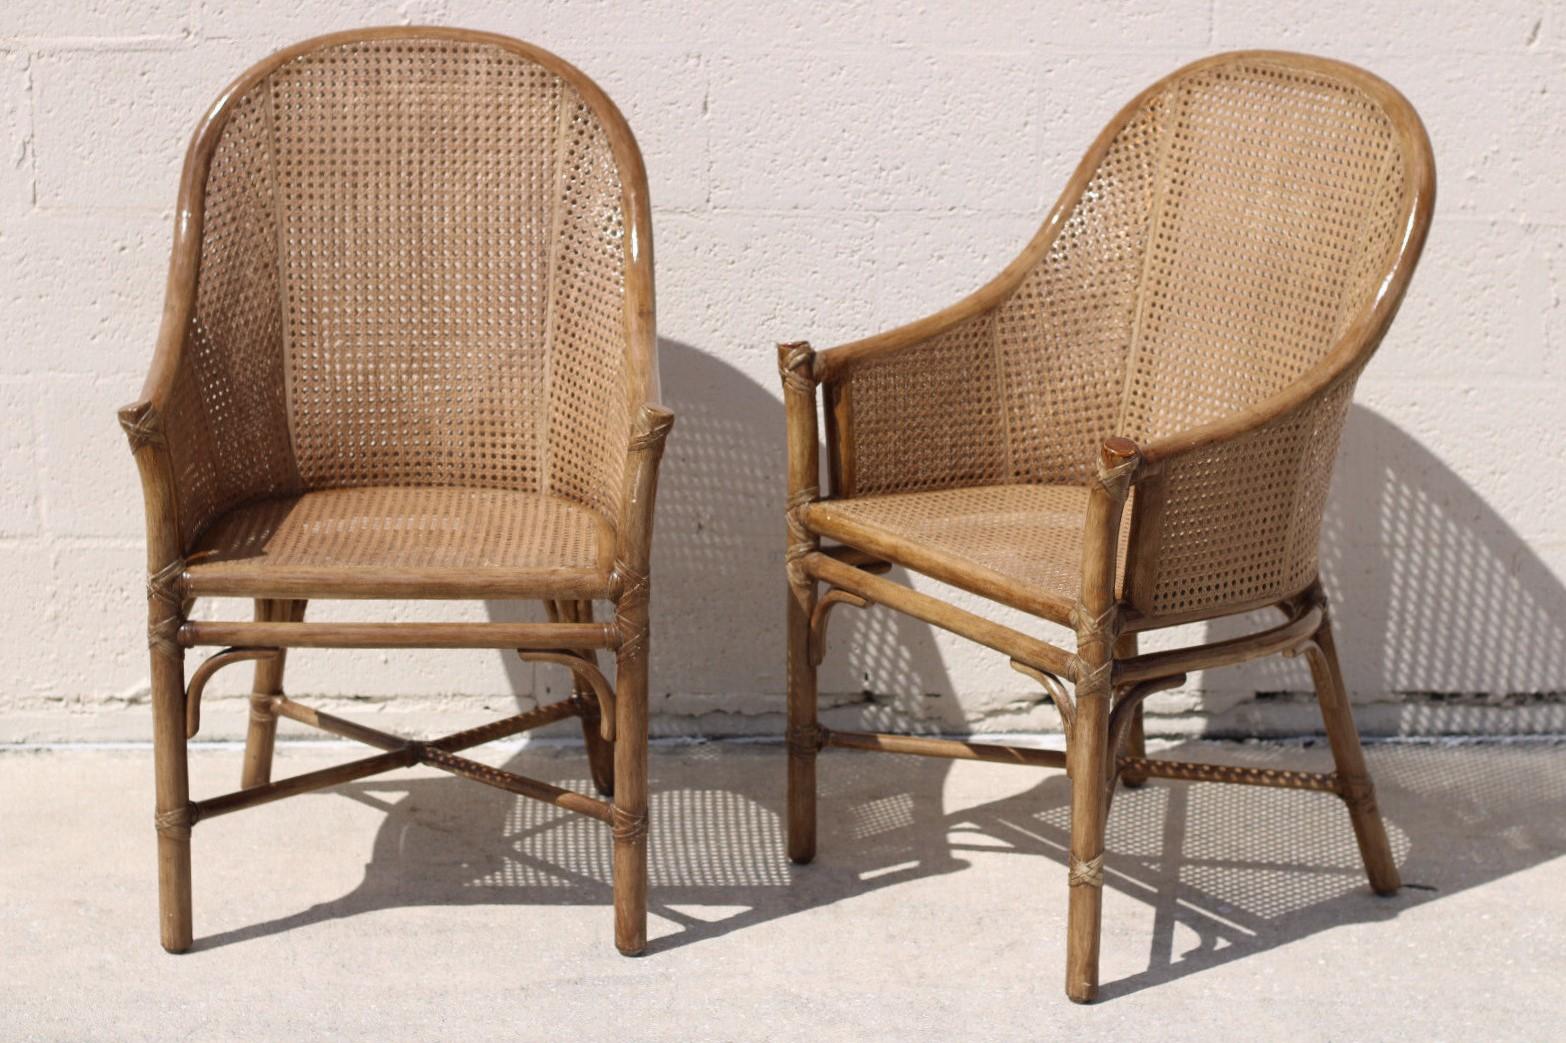 Hand-Crafted Elinor McGuire Rattan Caned Barrel Back Arm Chairs, a Pair For Sale